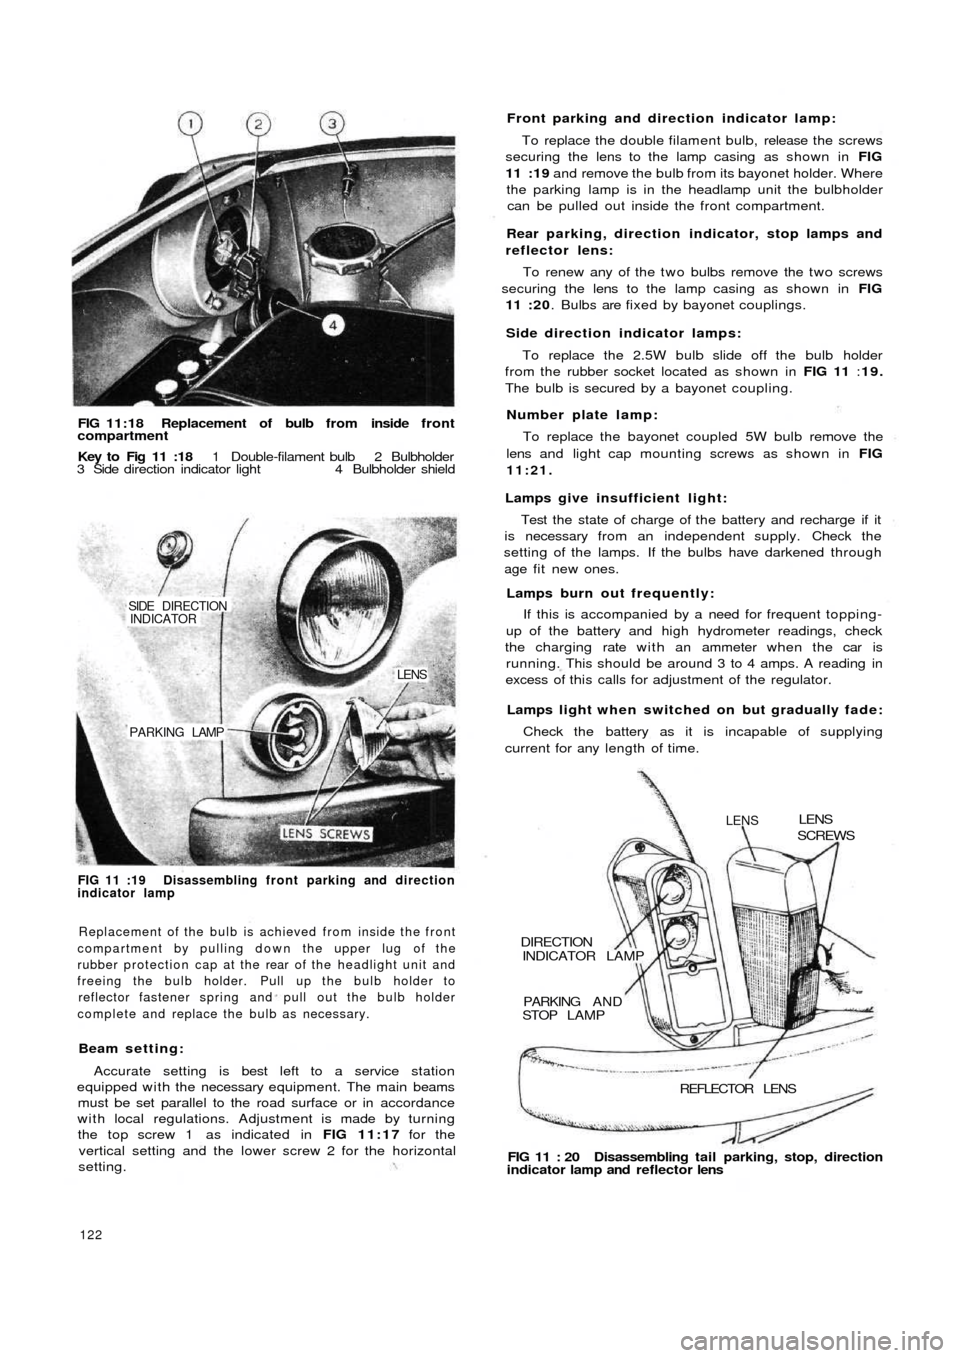 FIAT 500 1960 1.G Workshop Manual FIG 11:18 Replacement of bulb from inside f r o n tcompartment
Key to  Fig 11 :18 1 Double-filament bulb 2 Bulbholder
3 Side direction indicator light 4 Bulbholder shield
PARKING LAMP
LENS
SIDE  DIREC